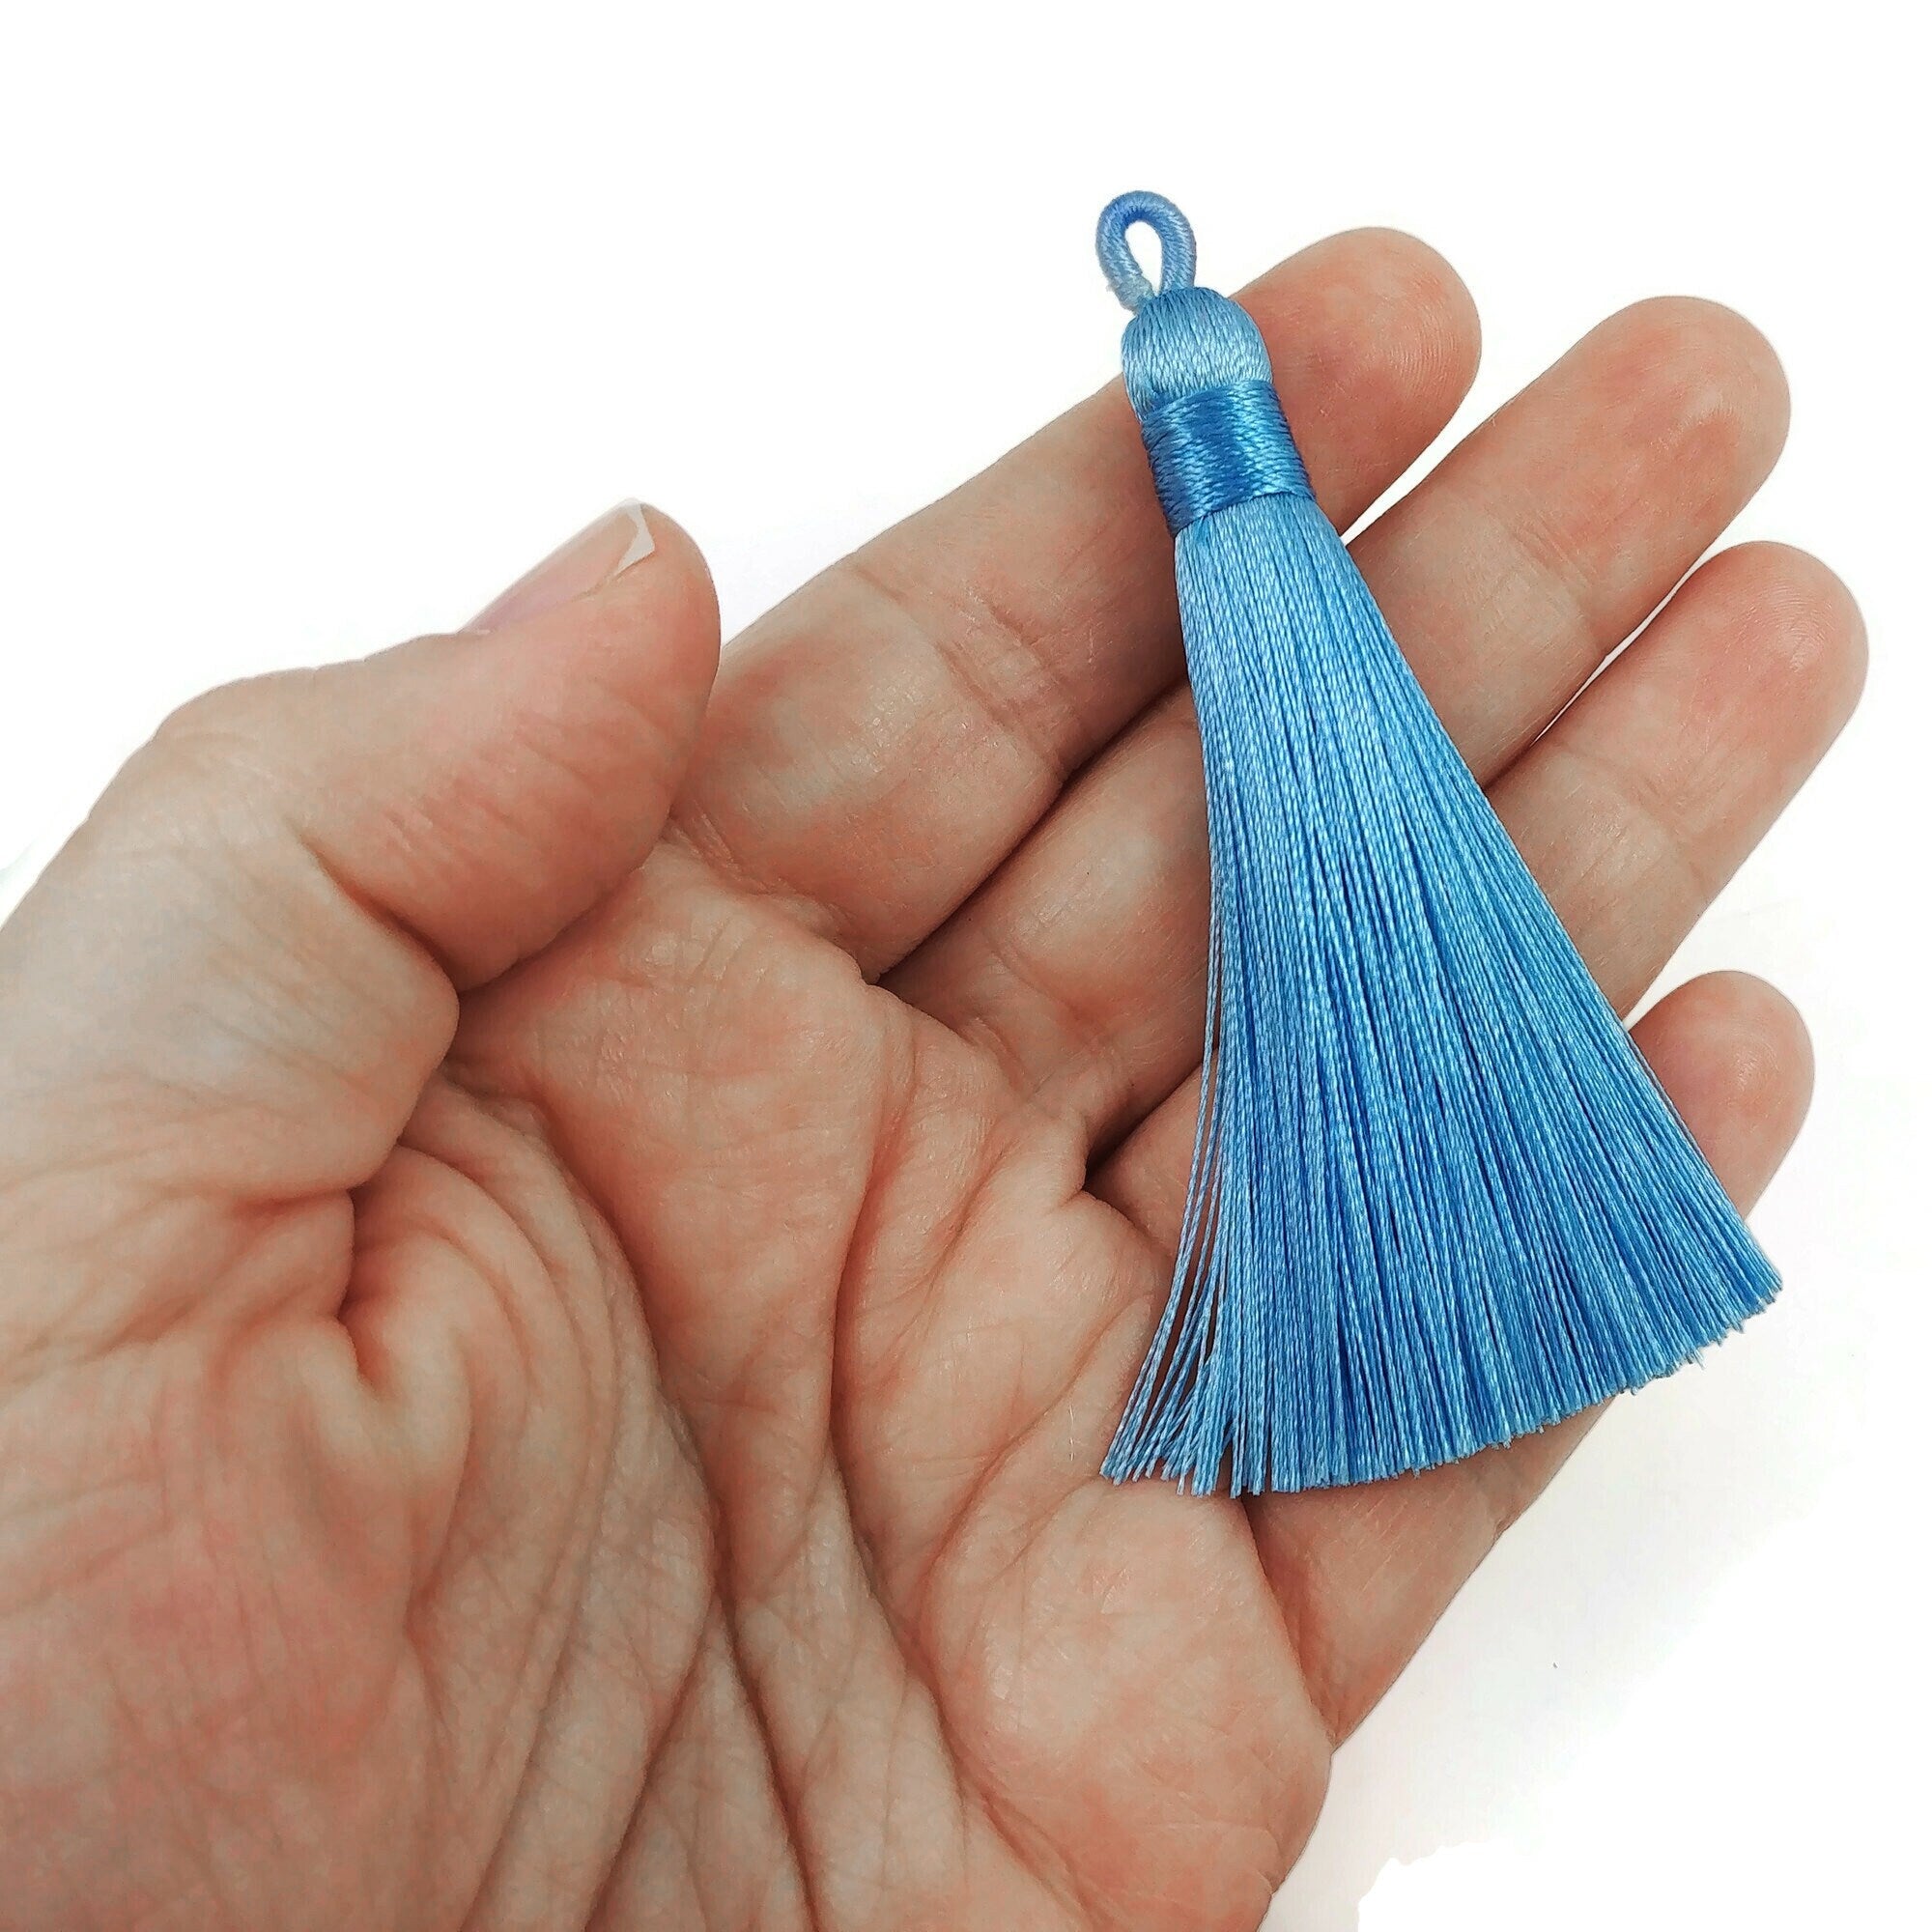 Big silky tassel 80mm long, Choose your colors, High Quality, Bulk or by unit